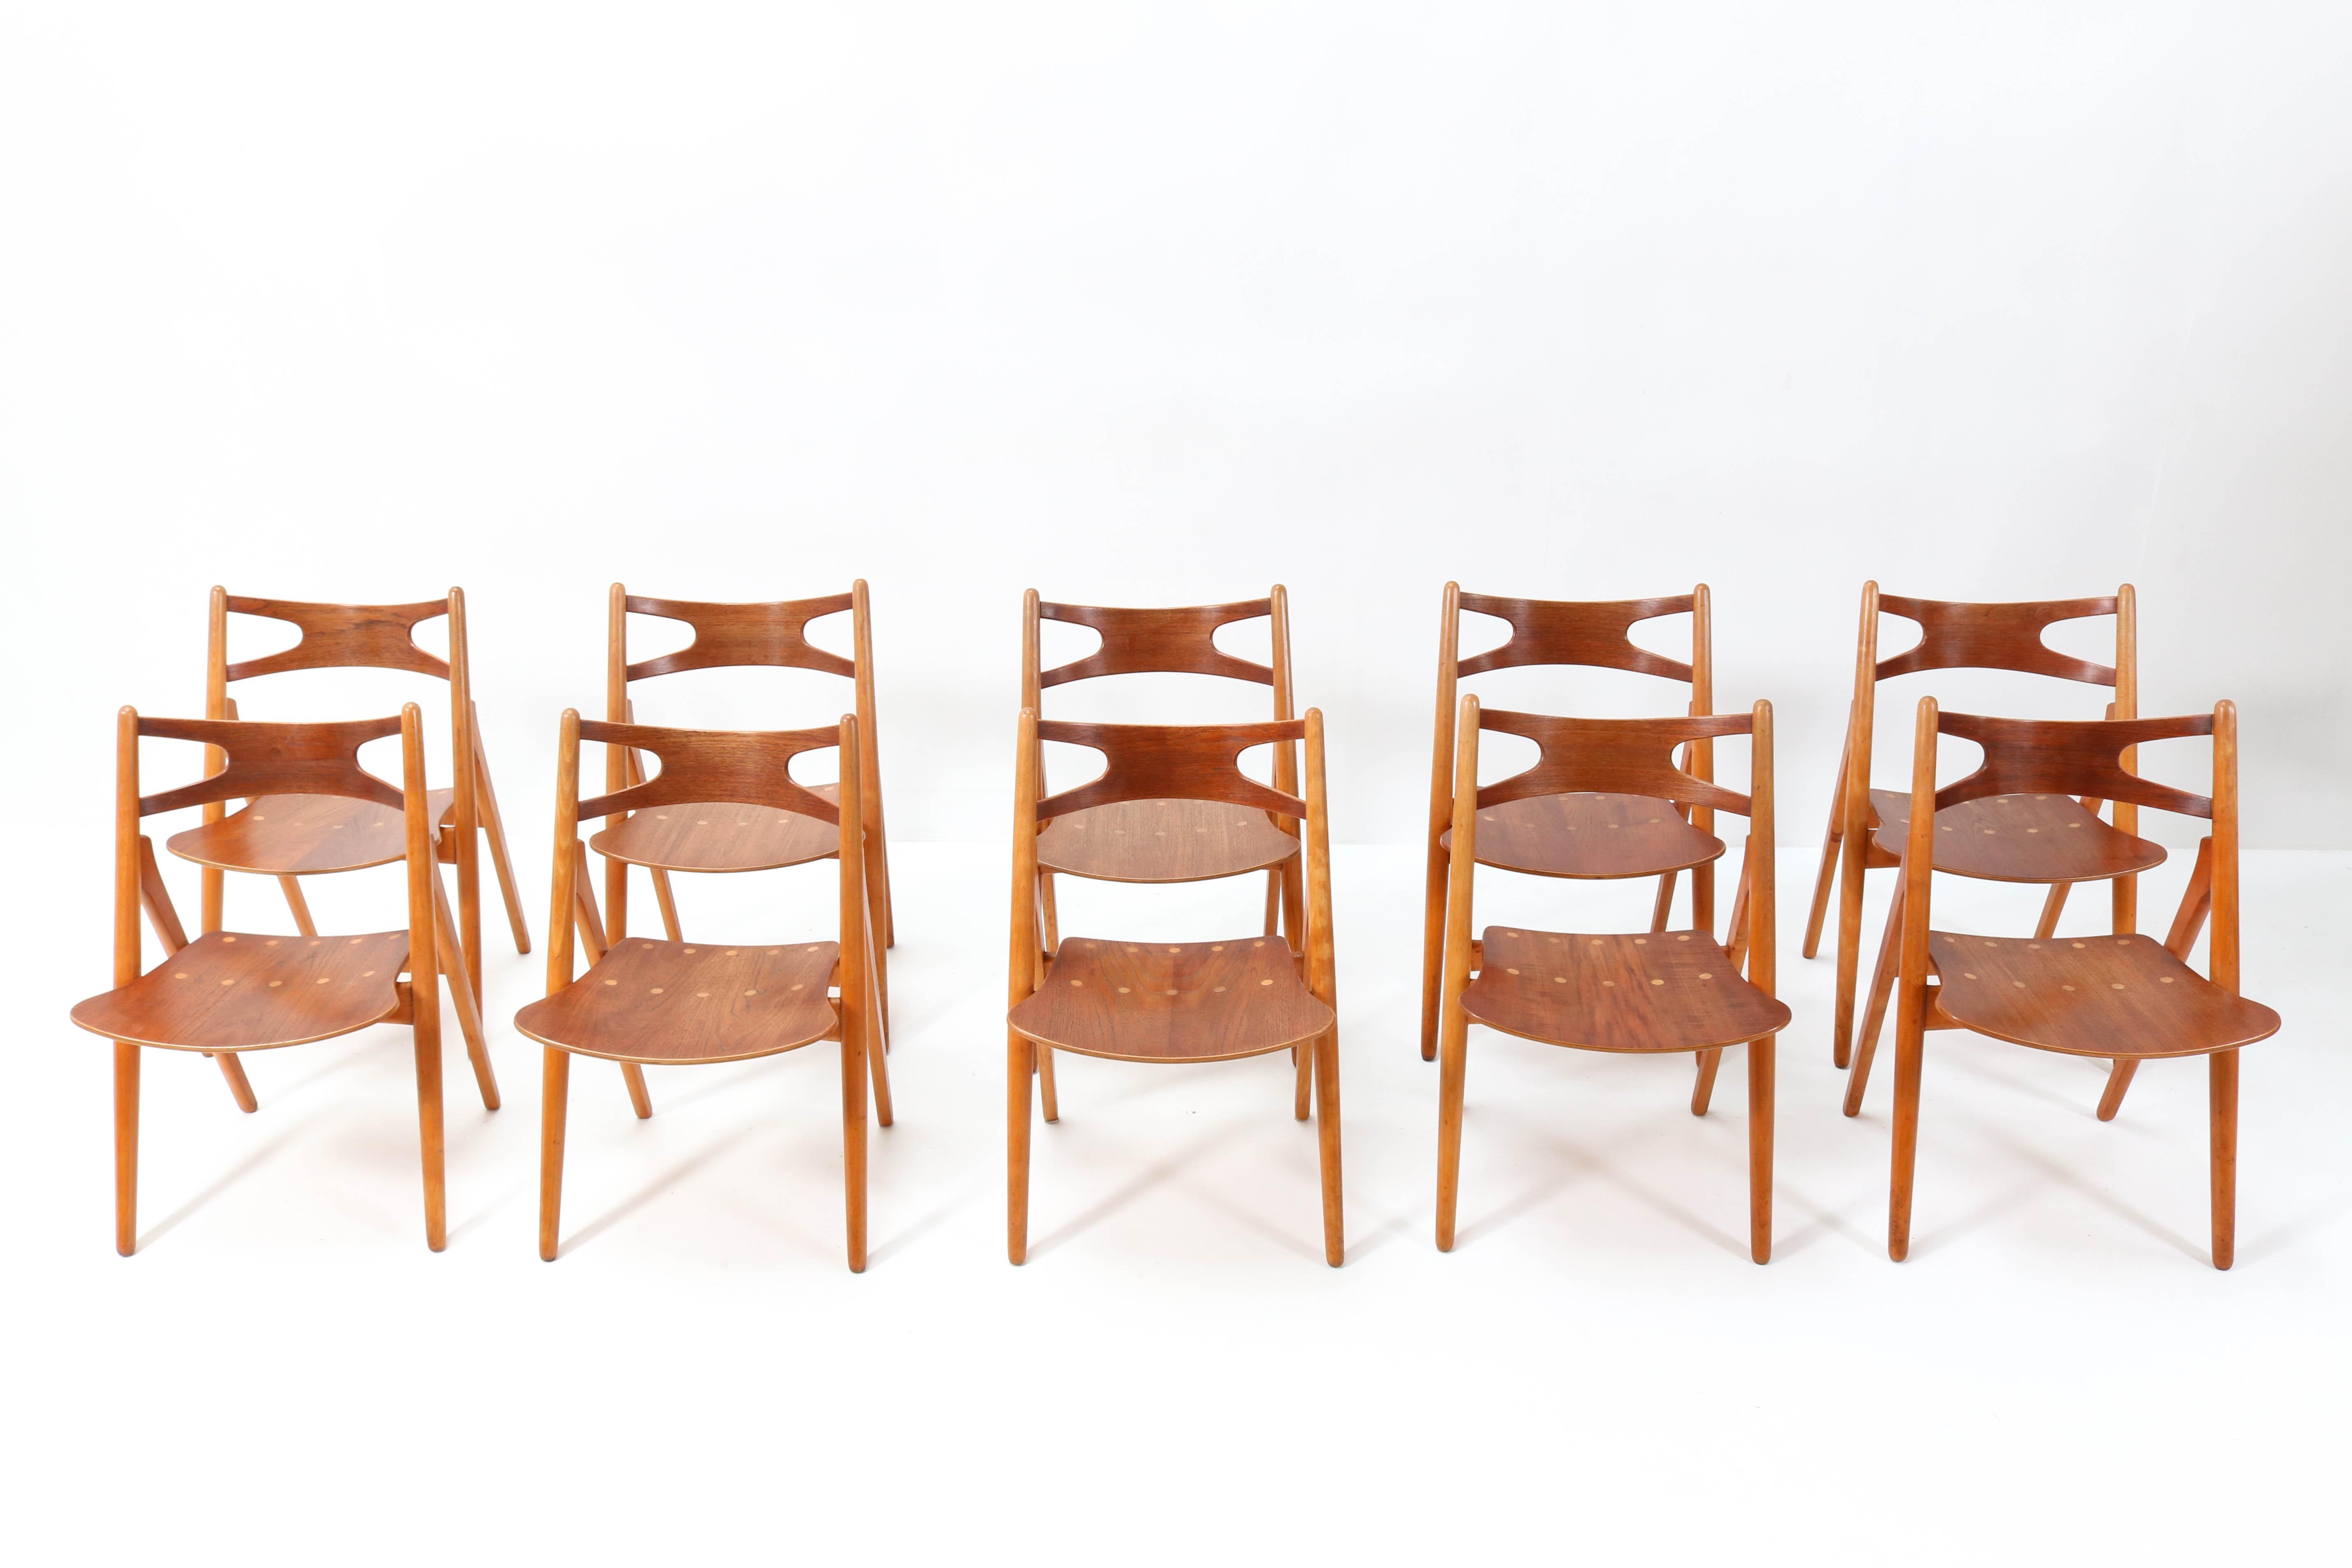 Magnificent and rare set of ten Sawbuck CH-29 chairs.
Design by Hans J. Wegner for Carl Hansen & Søn.
Striking Danish design from the 1950s.
Solid beech frame with original teak veneer seat.
One of the ten chairs is marked with the manufacturers